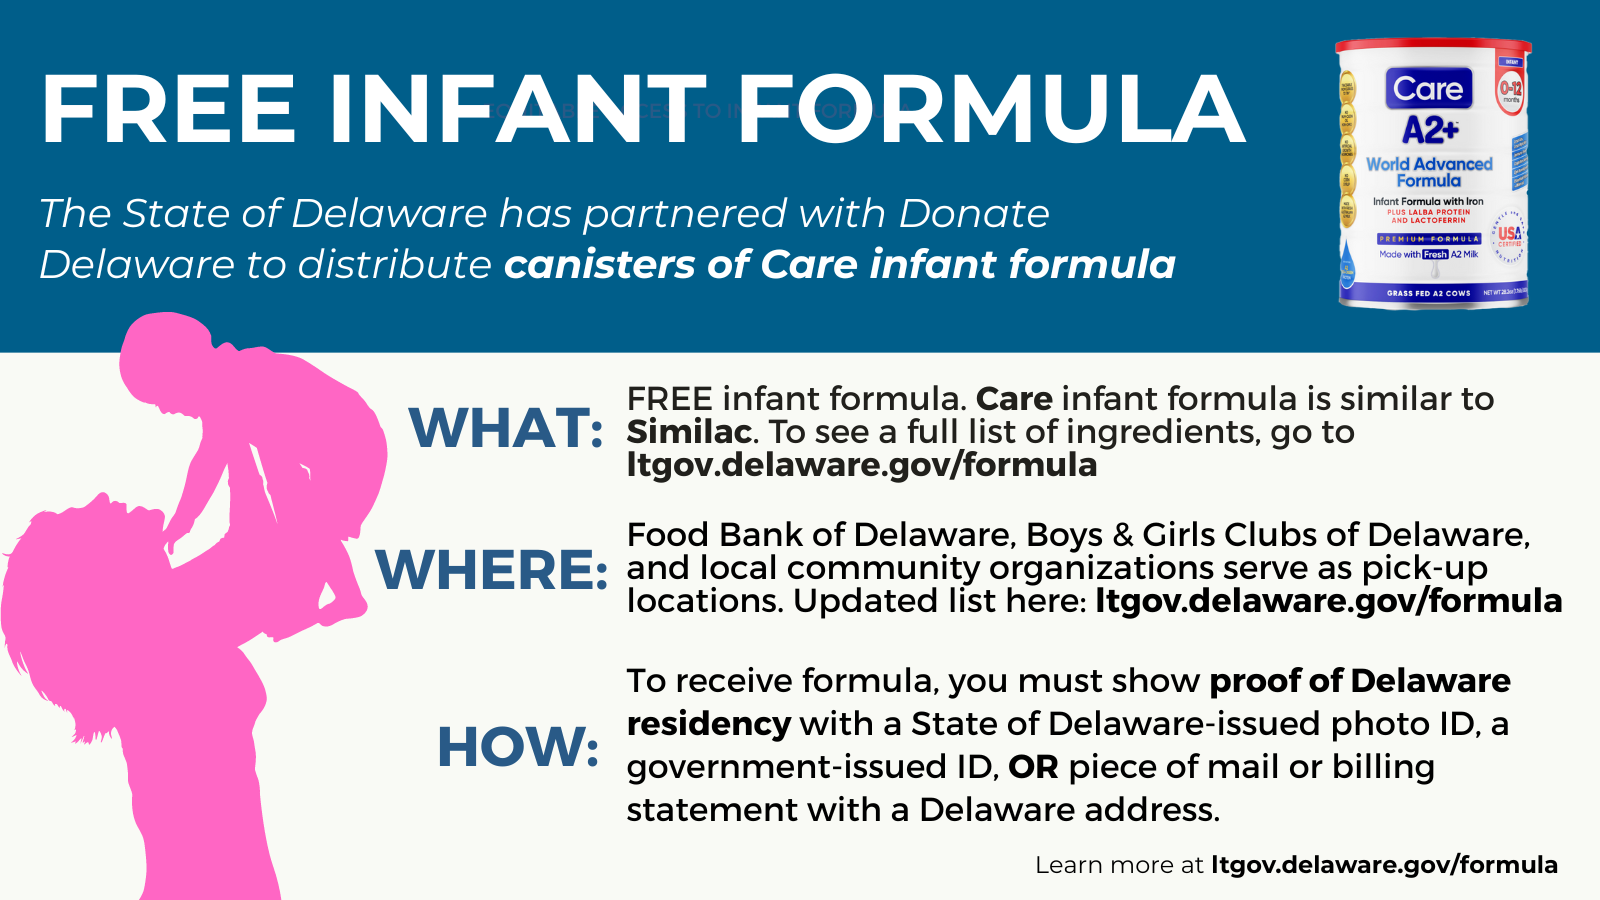 Concerns Regarding Donations of Infant Formula and Infant Feeding Items  During an Emergency, Nutrition